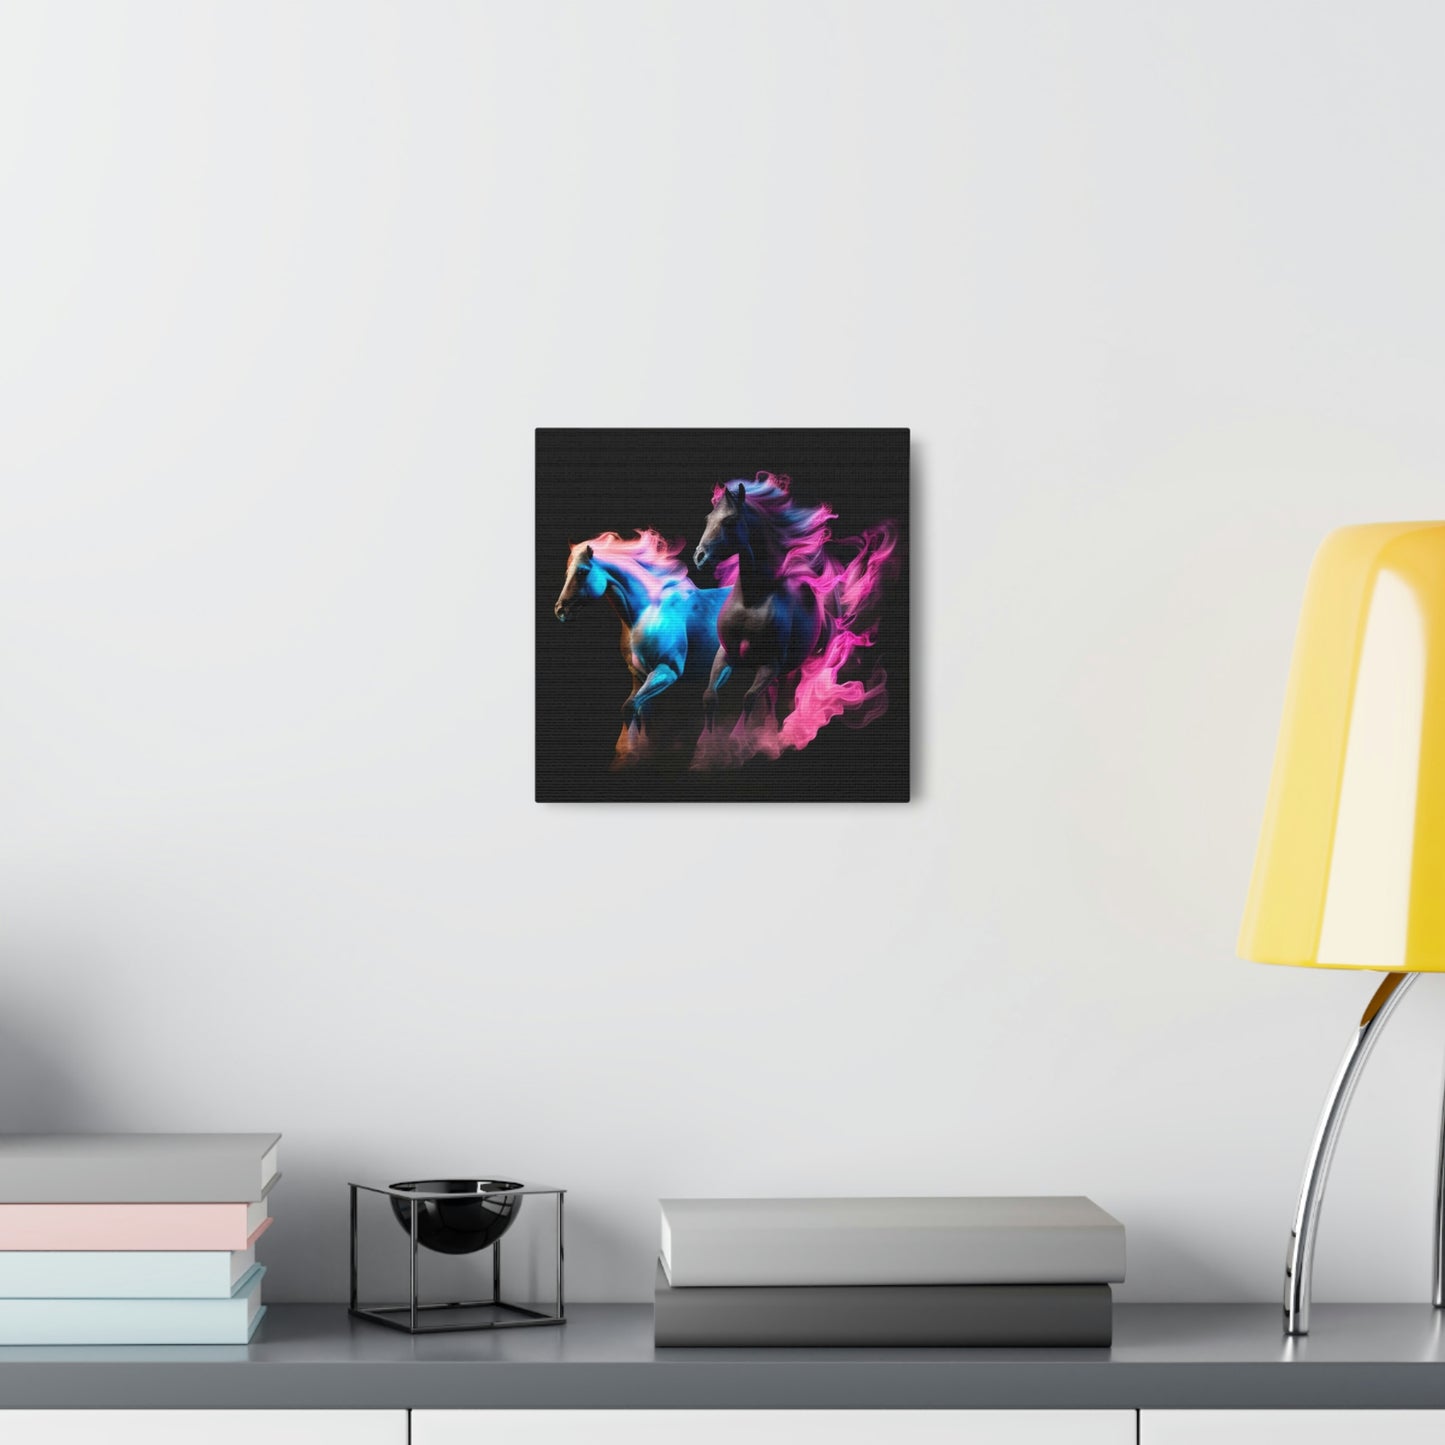 Canvas Gallery Wraps Horses Pink Blue Fire 3